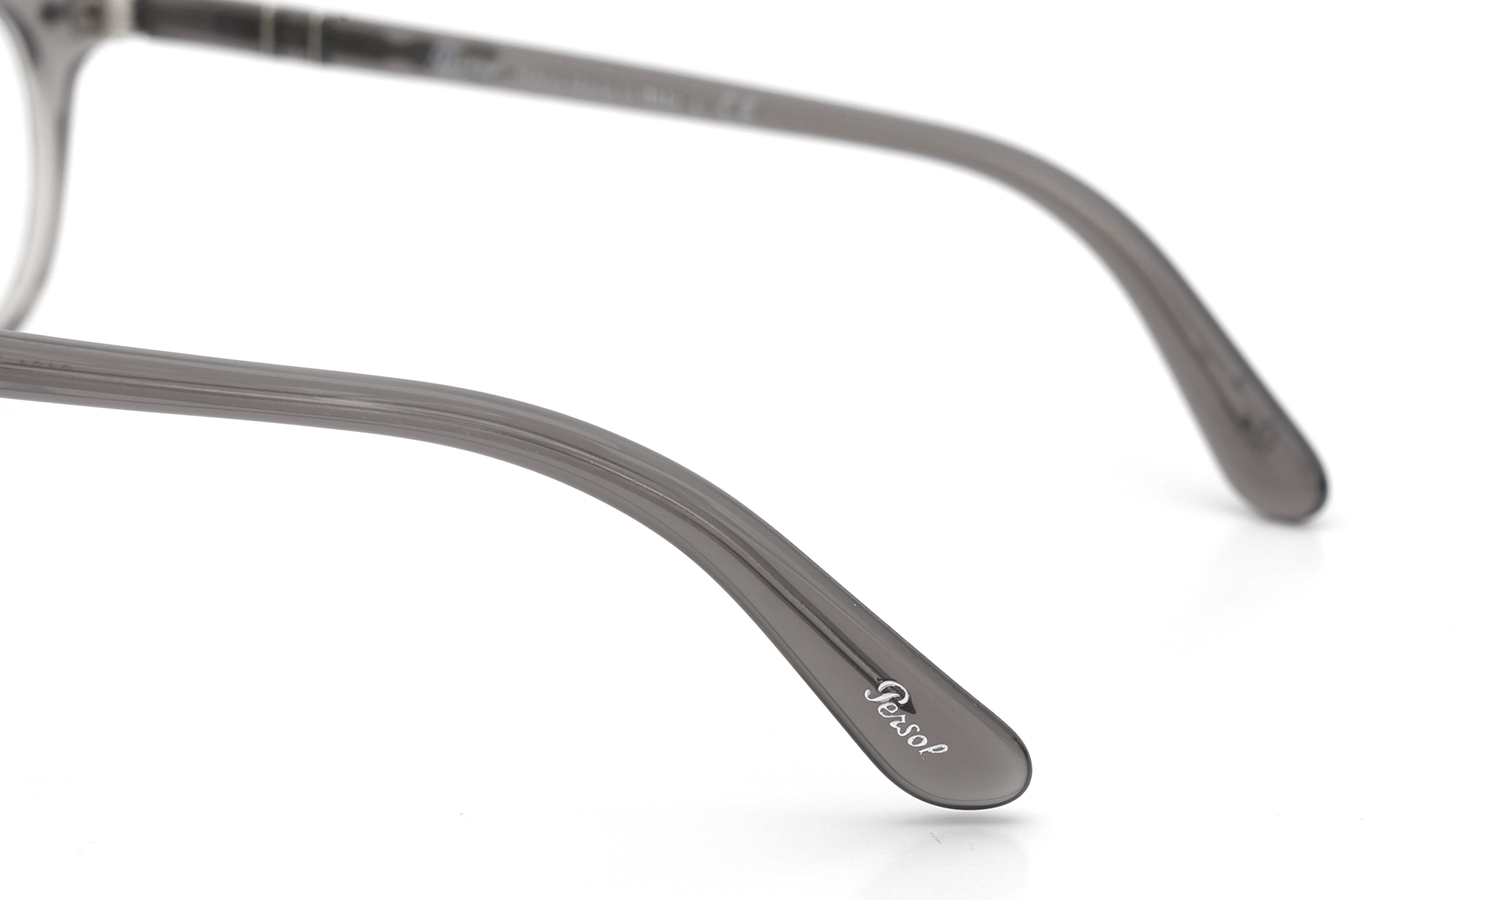 Persol 3121-V 1029(クリアグレー) 50size